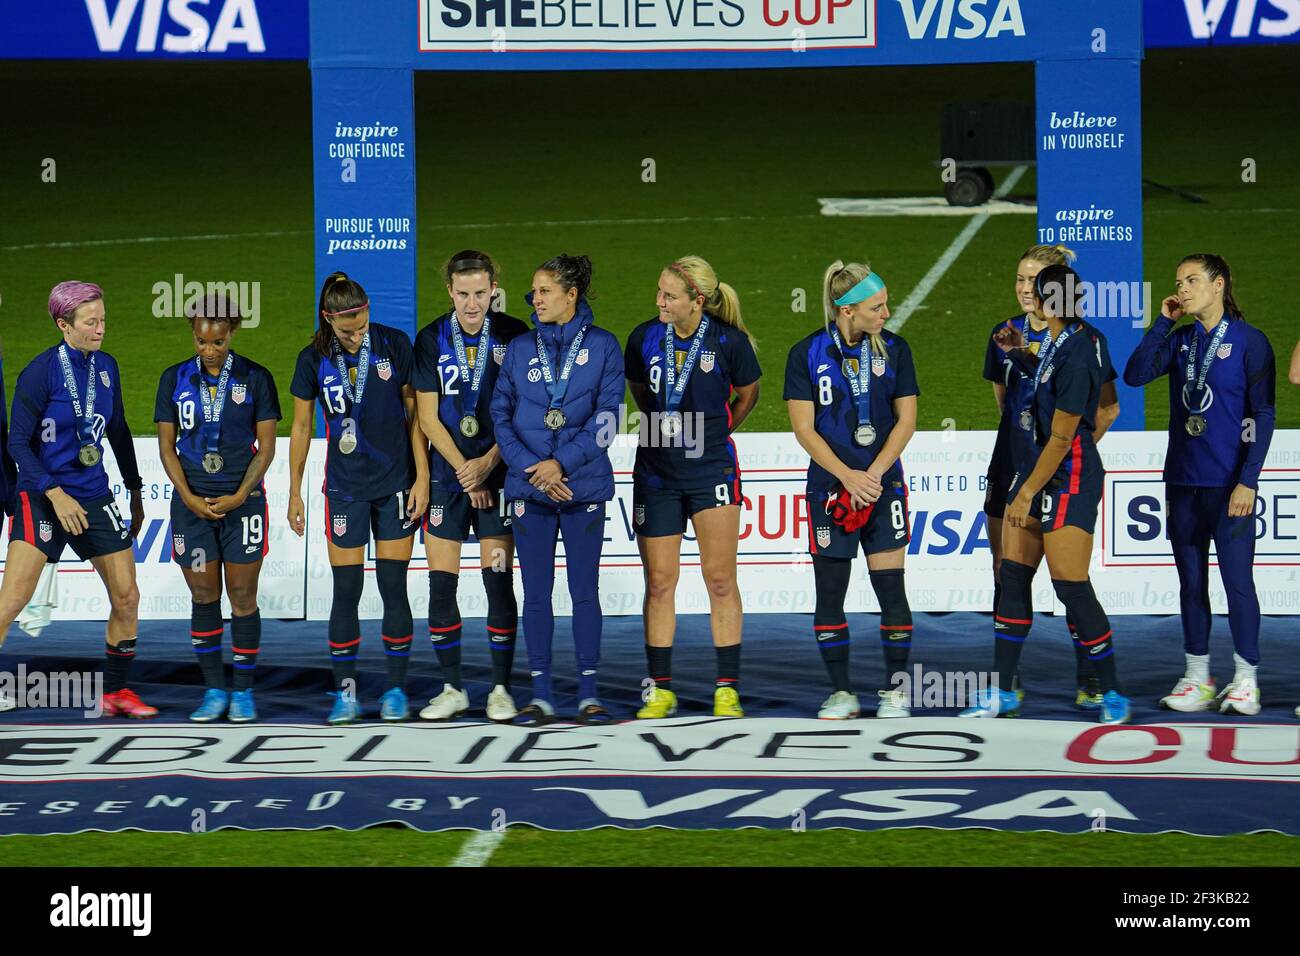 Orlando, Florida, USA, February 24, 2021, USA face Argentina during the SheBelieves Cup at Exploria Stadium  (Photo Credit:  Marty Jean-Louis) Stock Photo